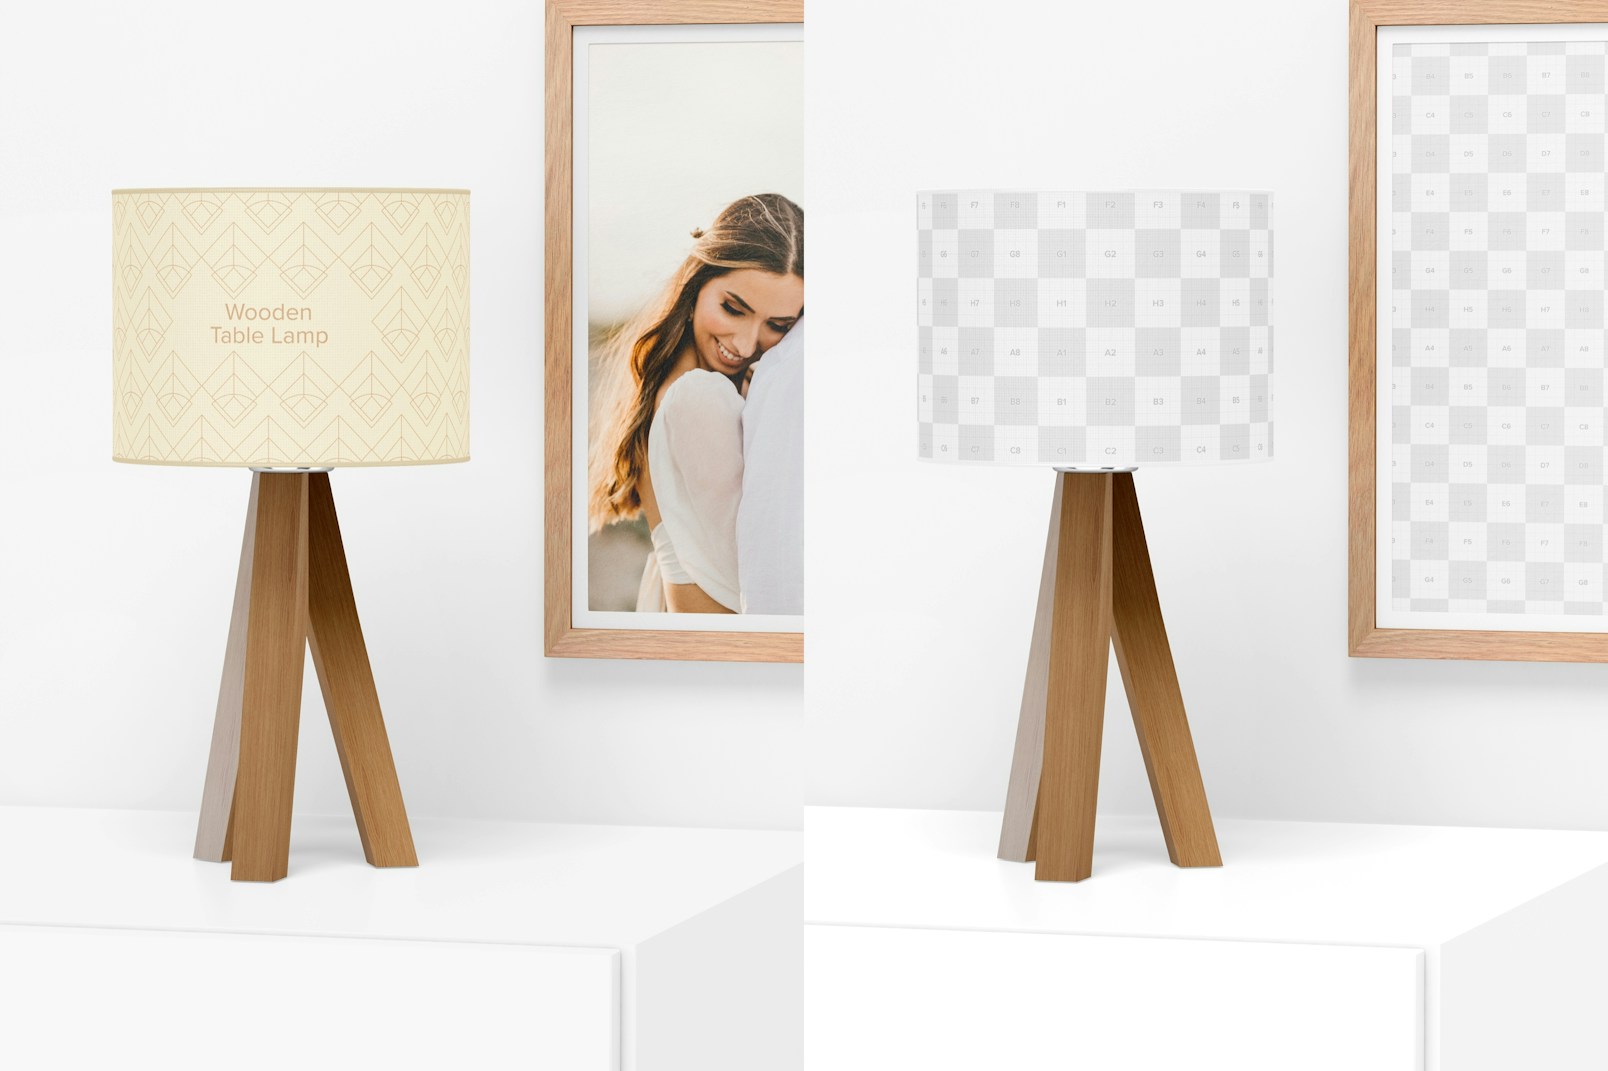 Wooden Table Lamp Mockup